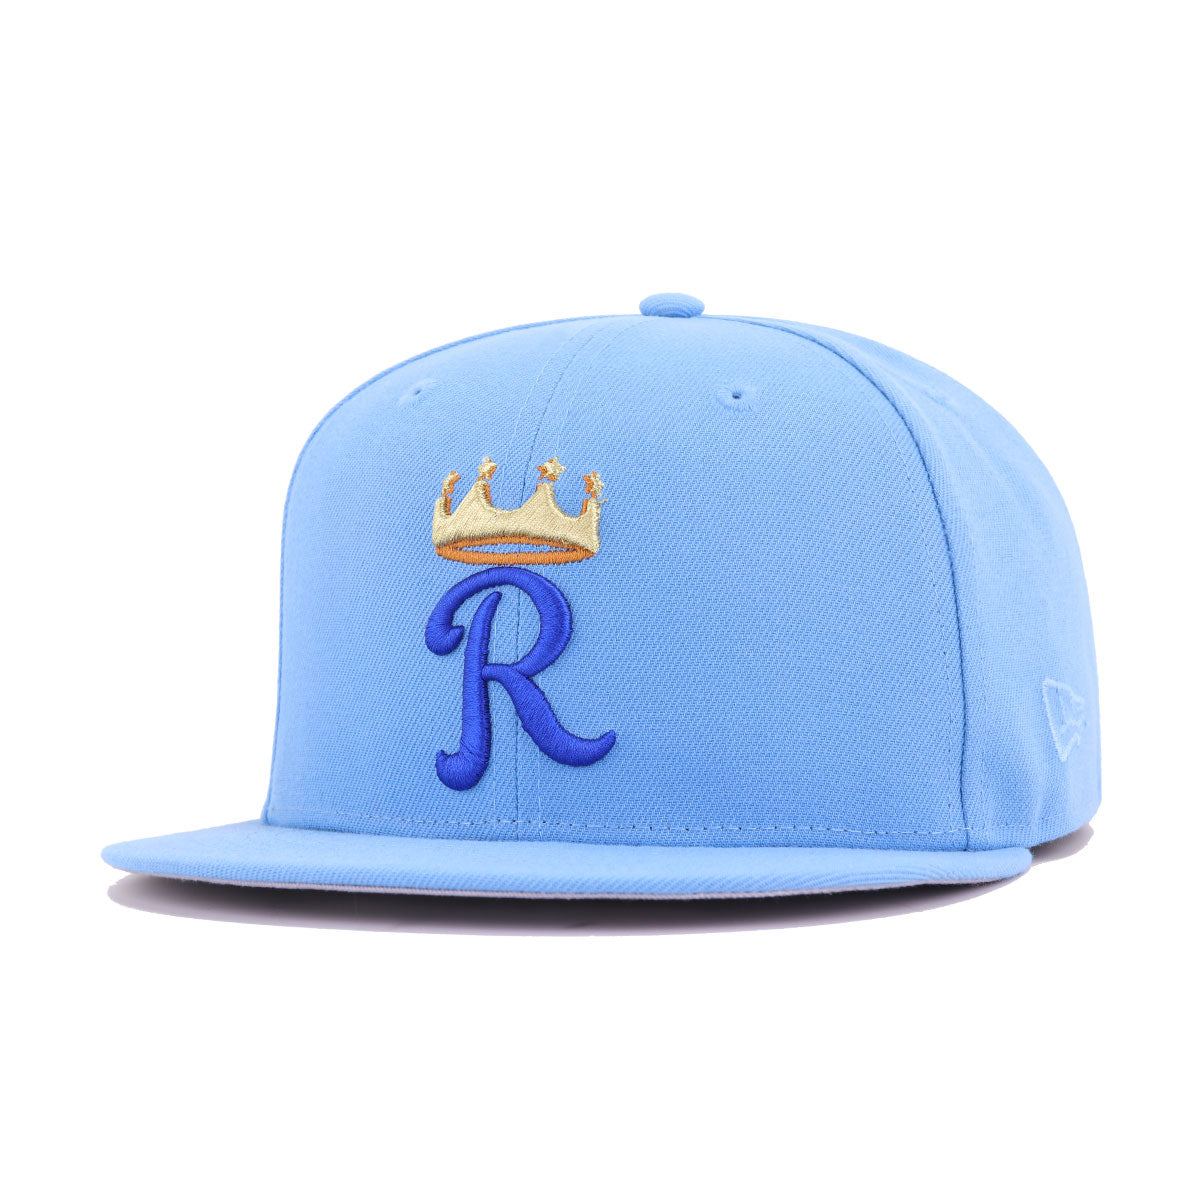 MLB Kansas City Royals Authentic On Field Alternate 59Fifty Fitted Cap, Sky  Blue